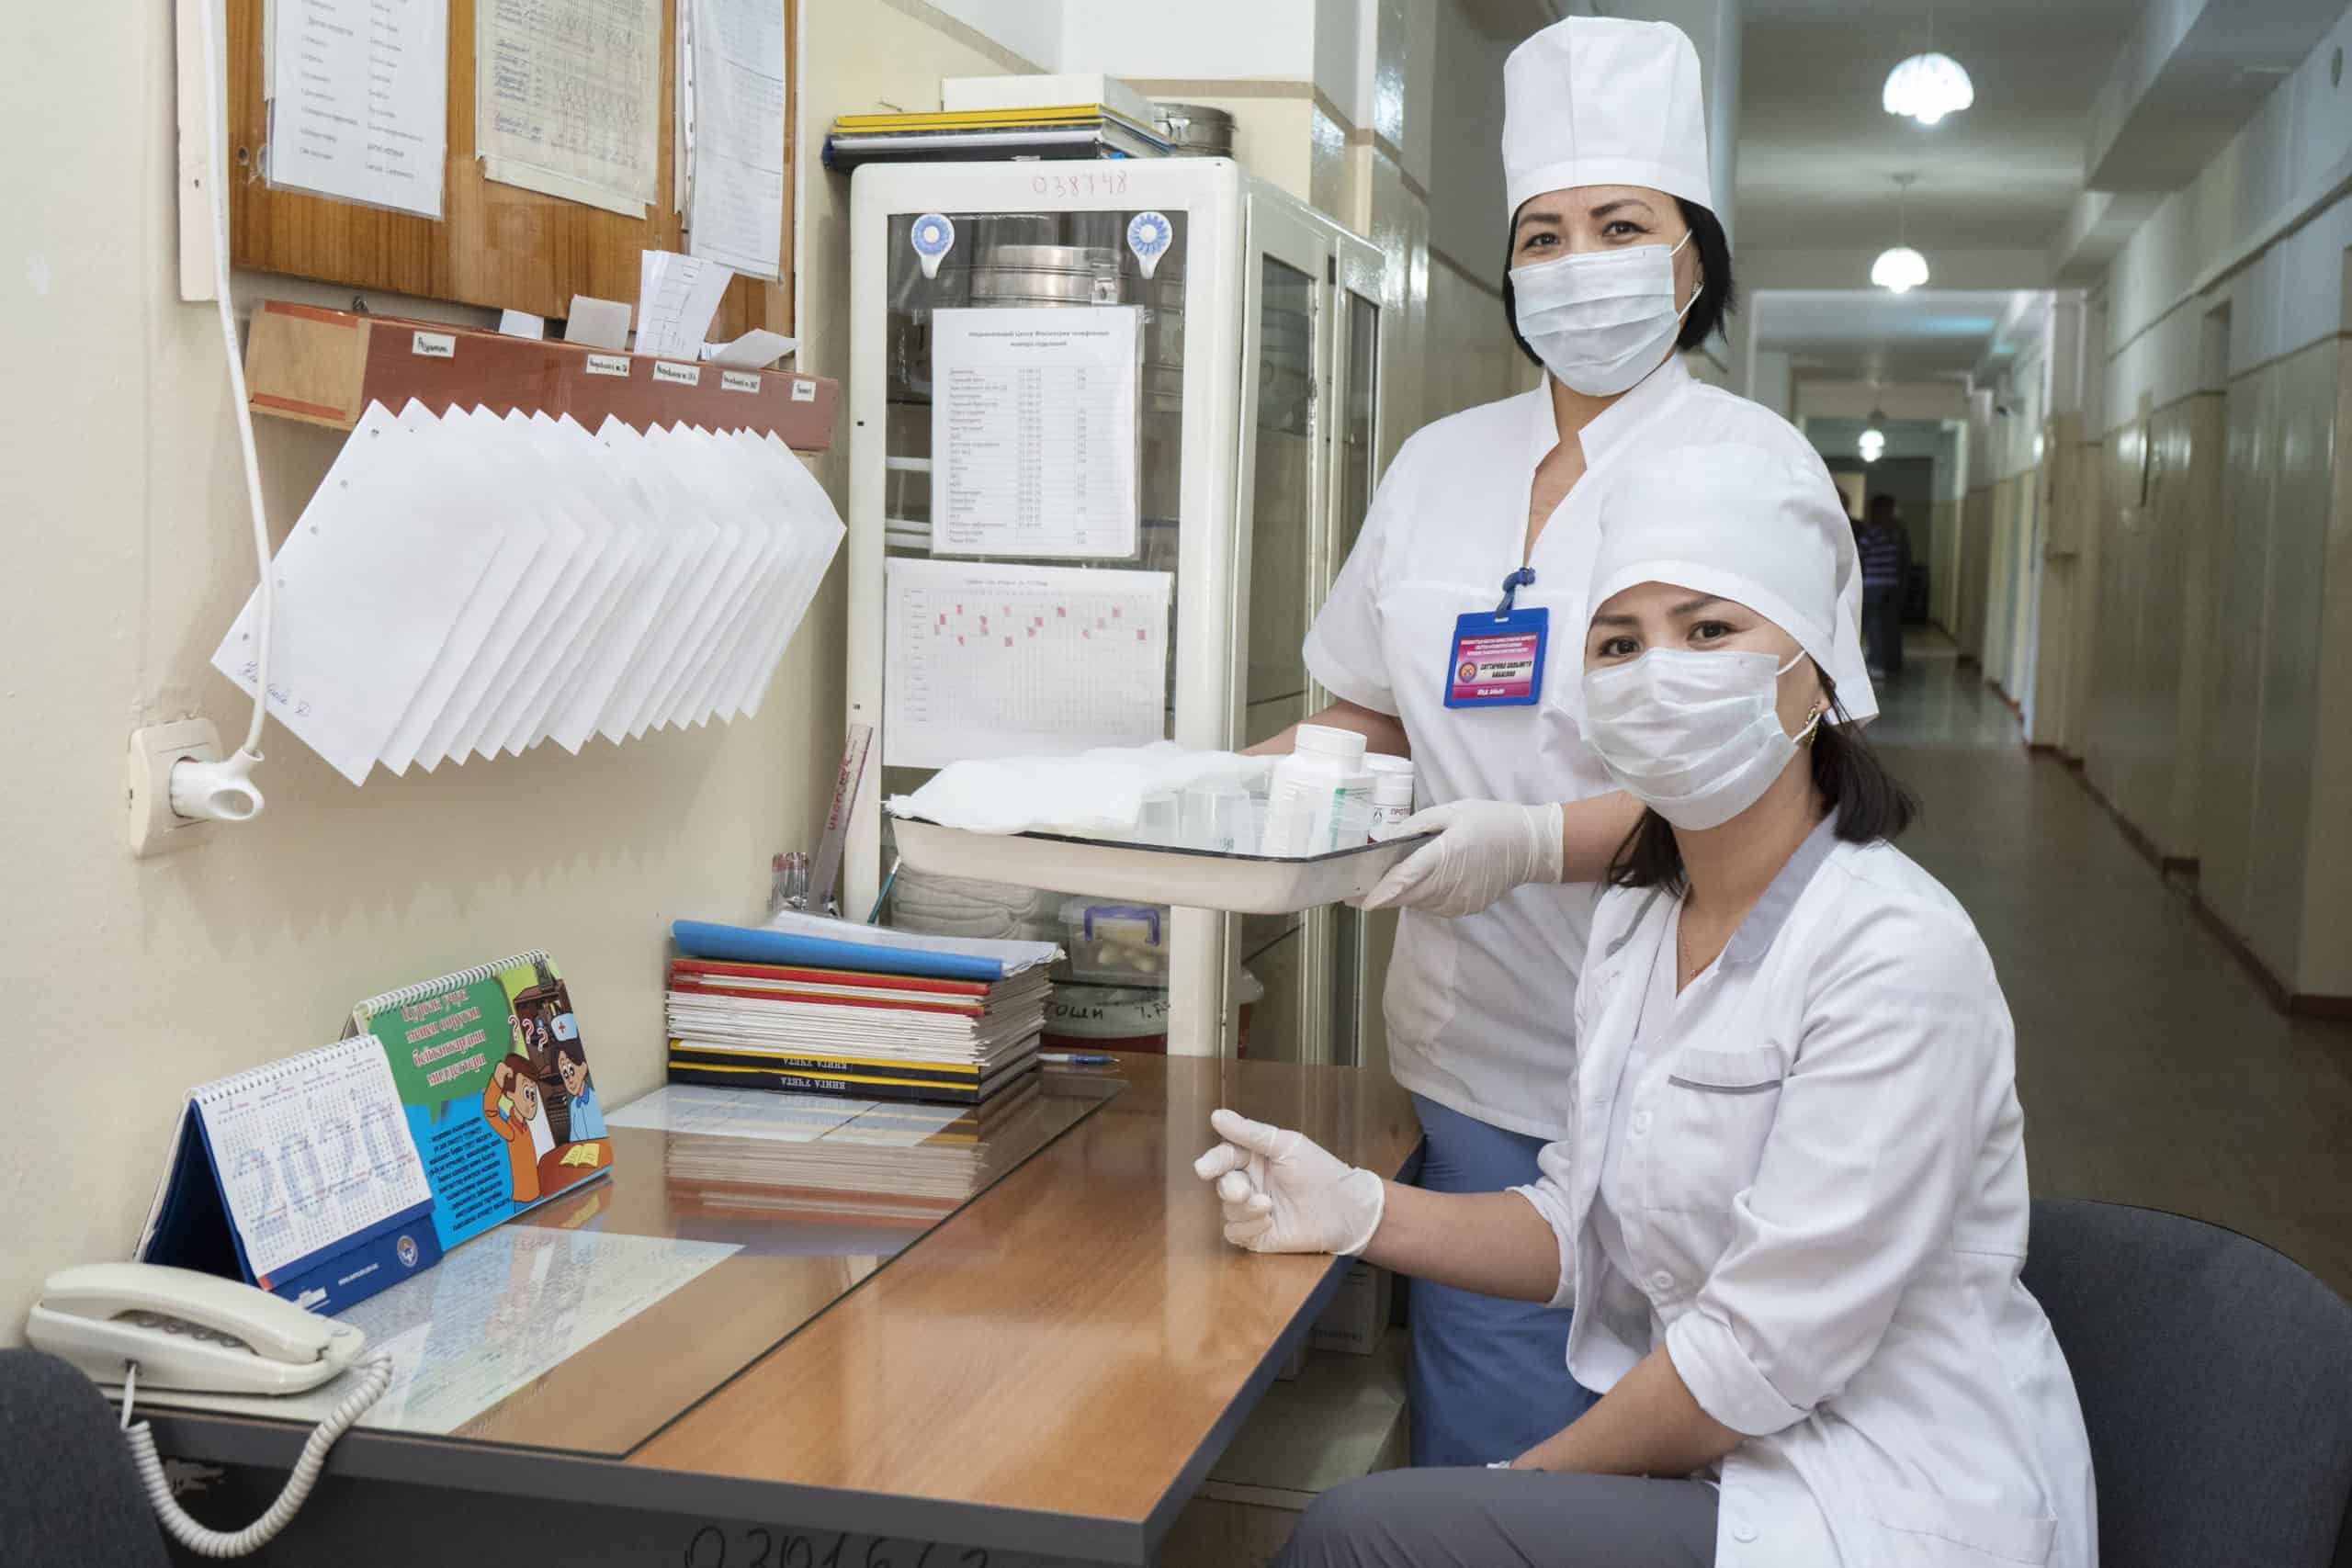 Building a Resilient Medicine Supply Chain to Combat Tuberculosis in the Kyrgyz Republic